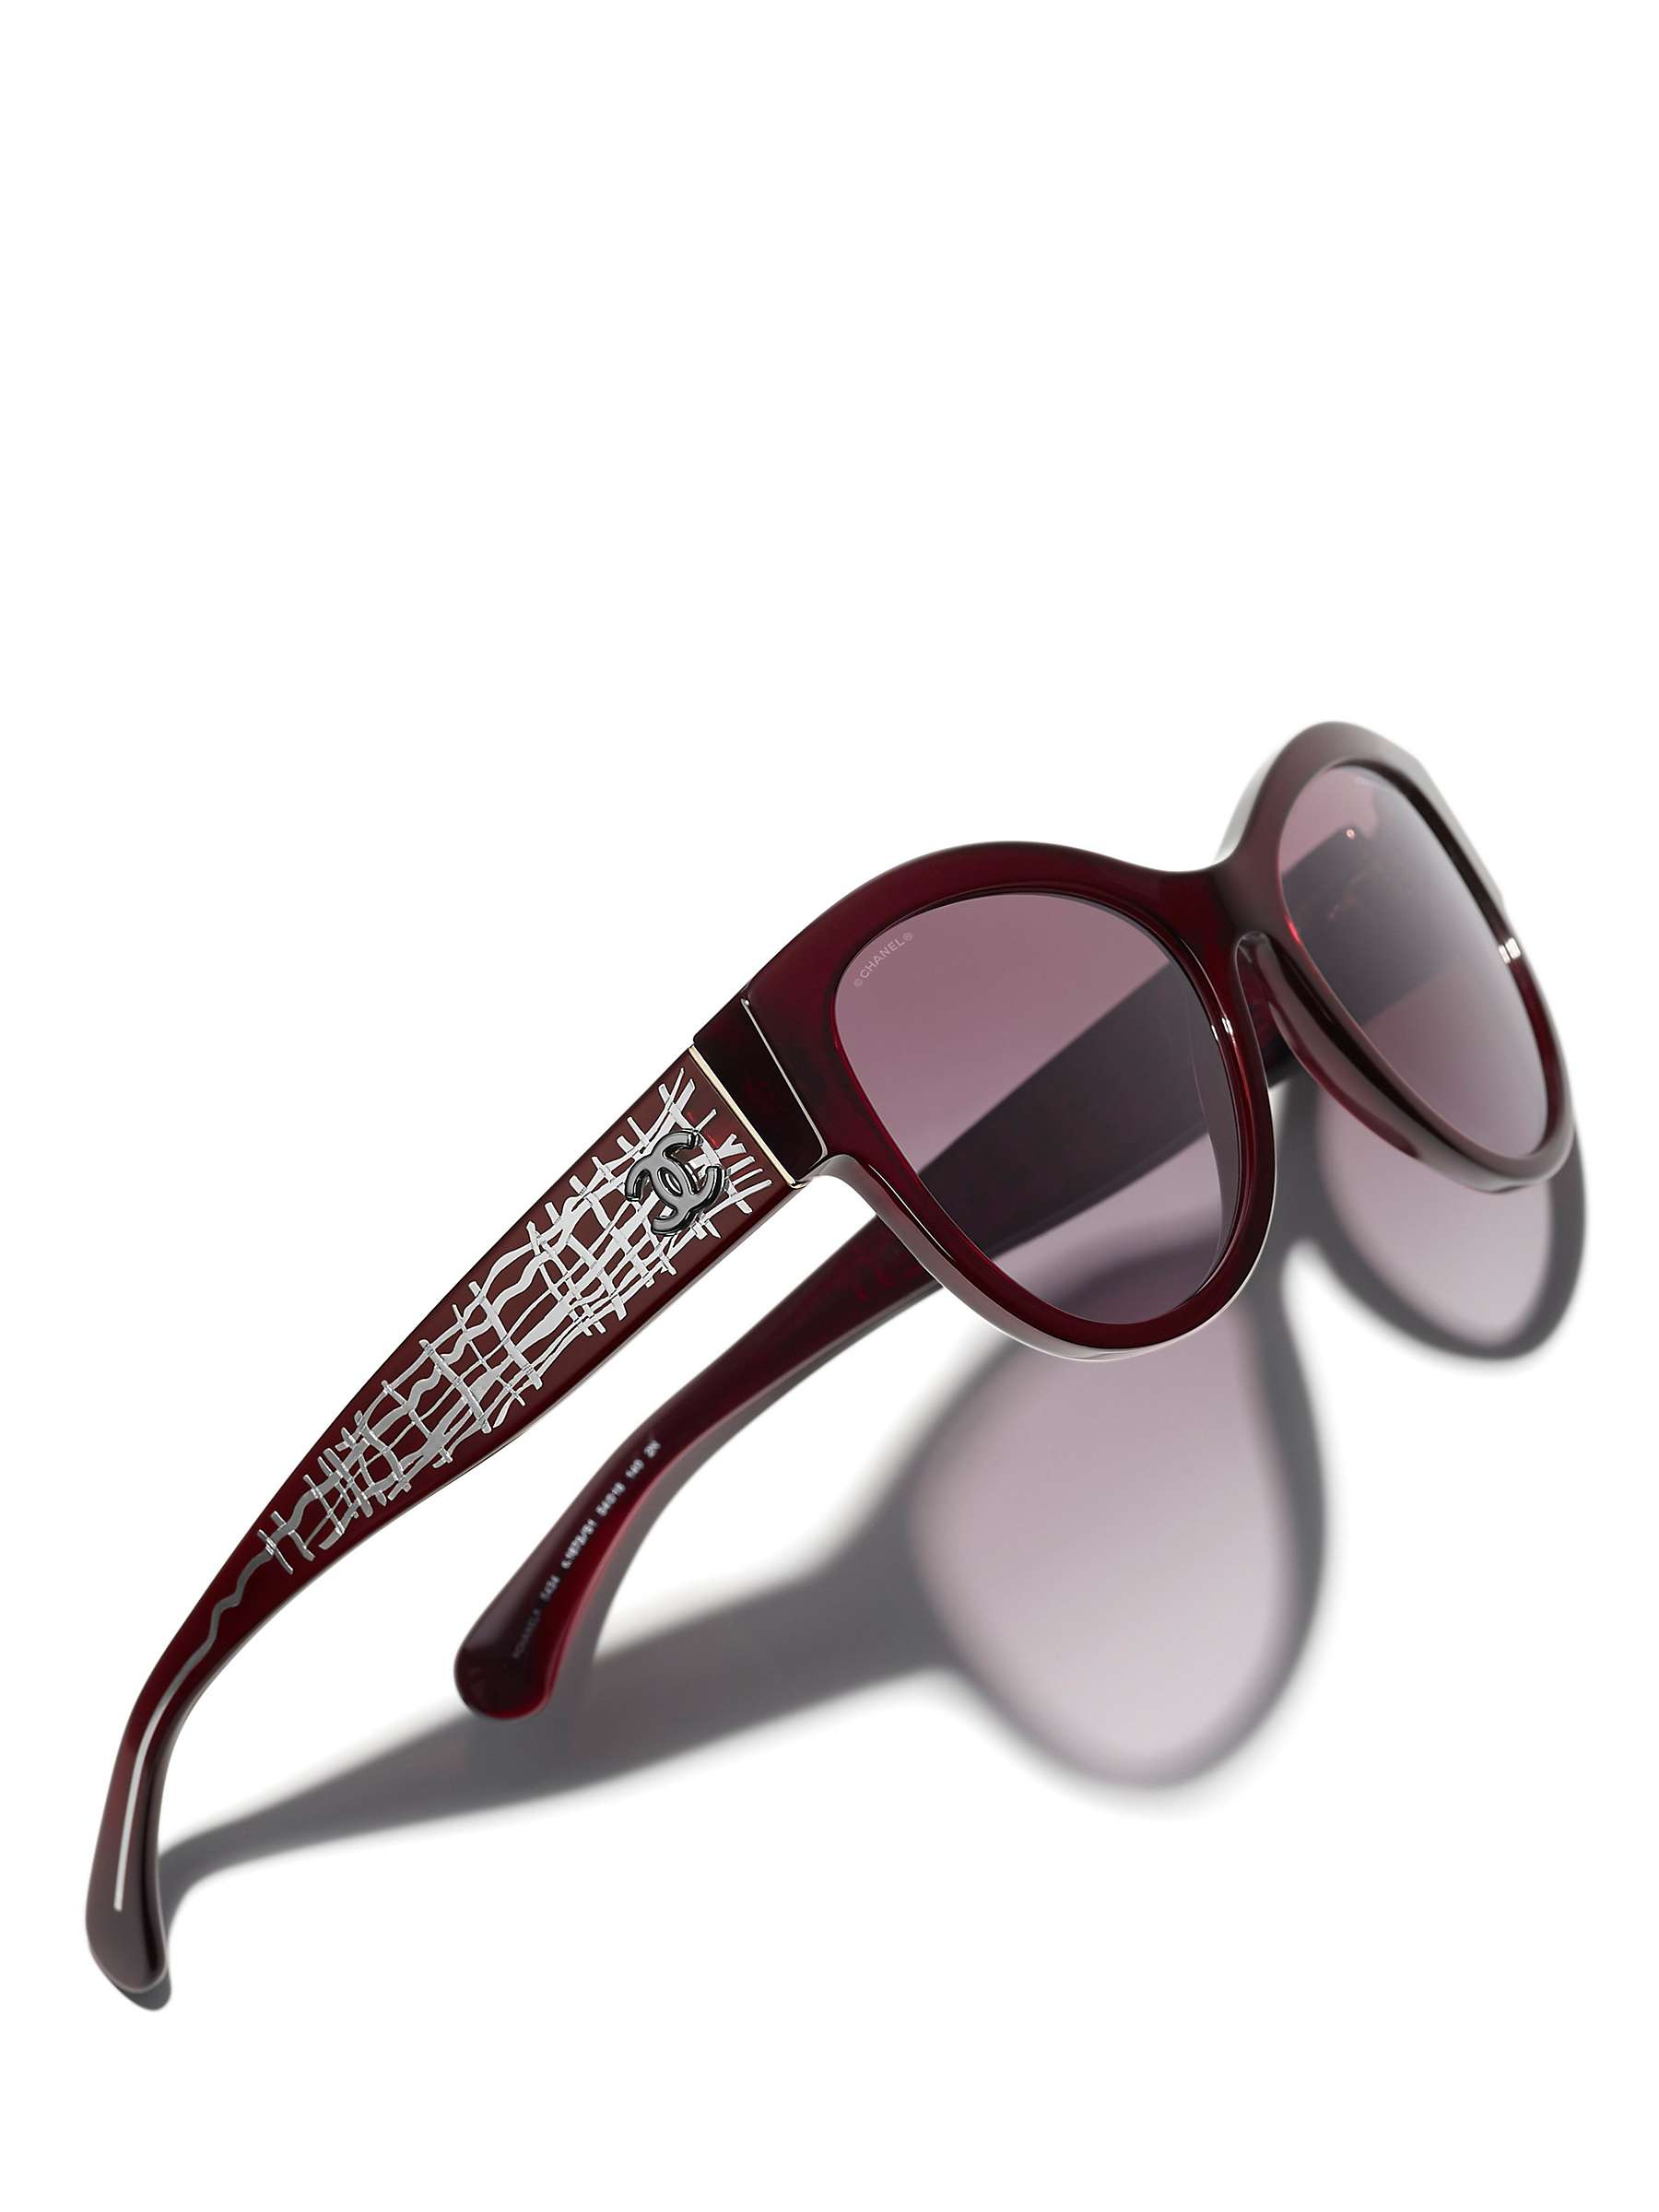 Buy CHANEL Oval Sunglasses CH5434 Dark Red/Pink Gradient Online at johnlewis.com